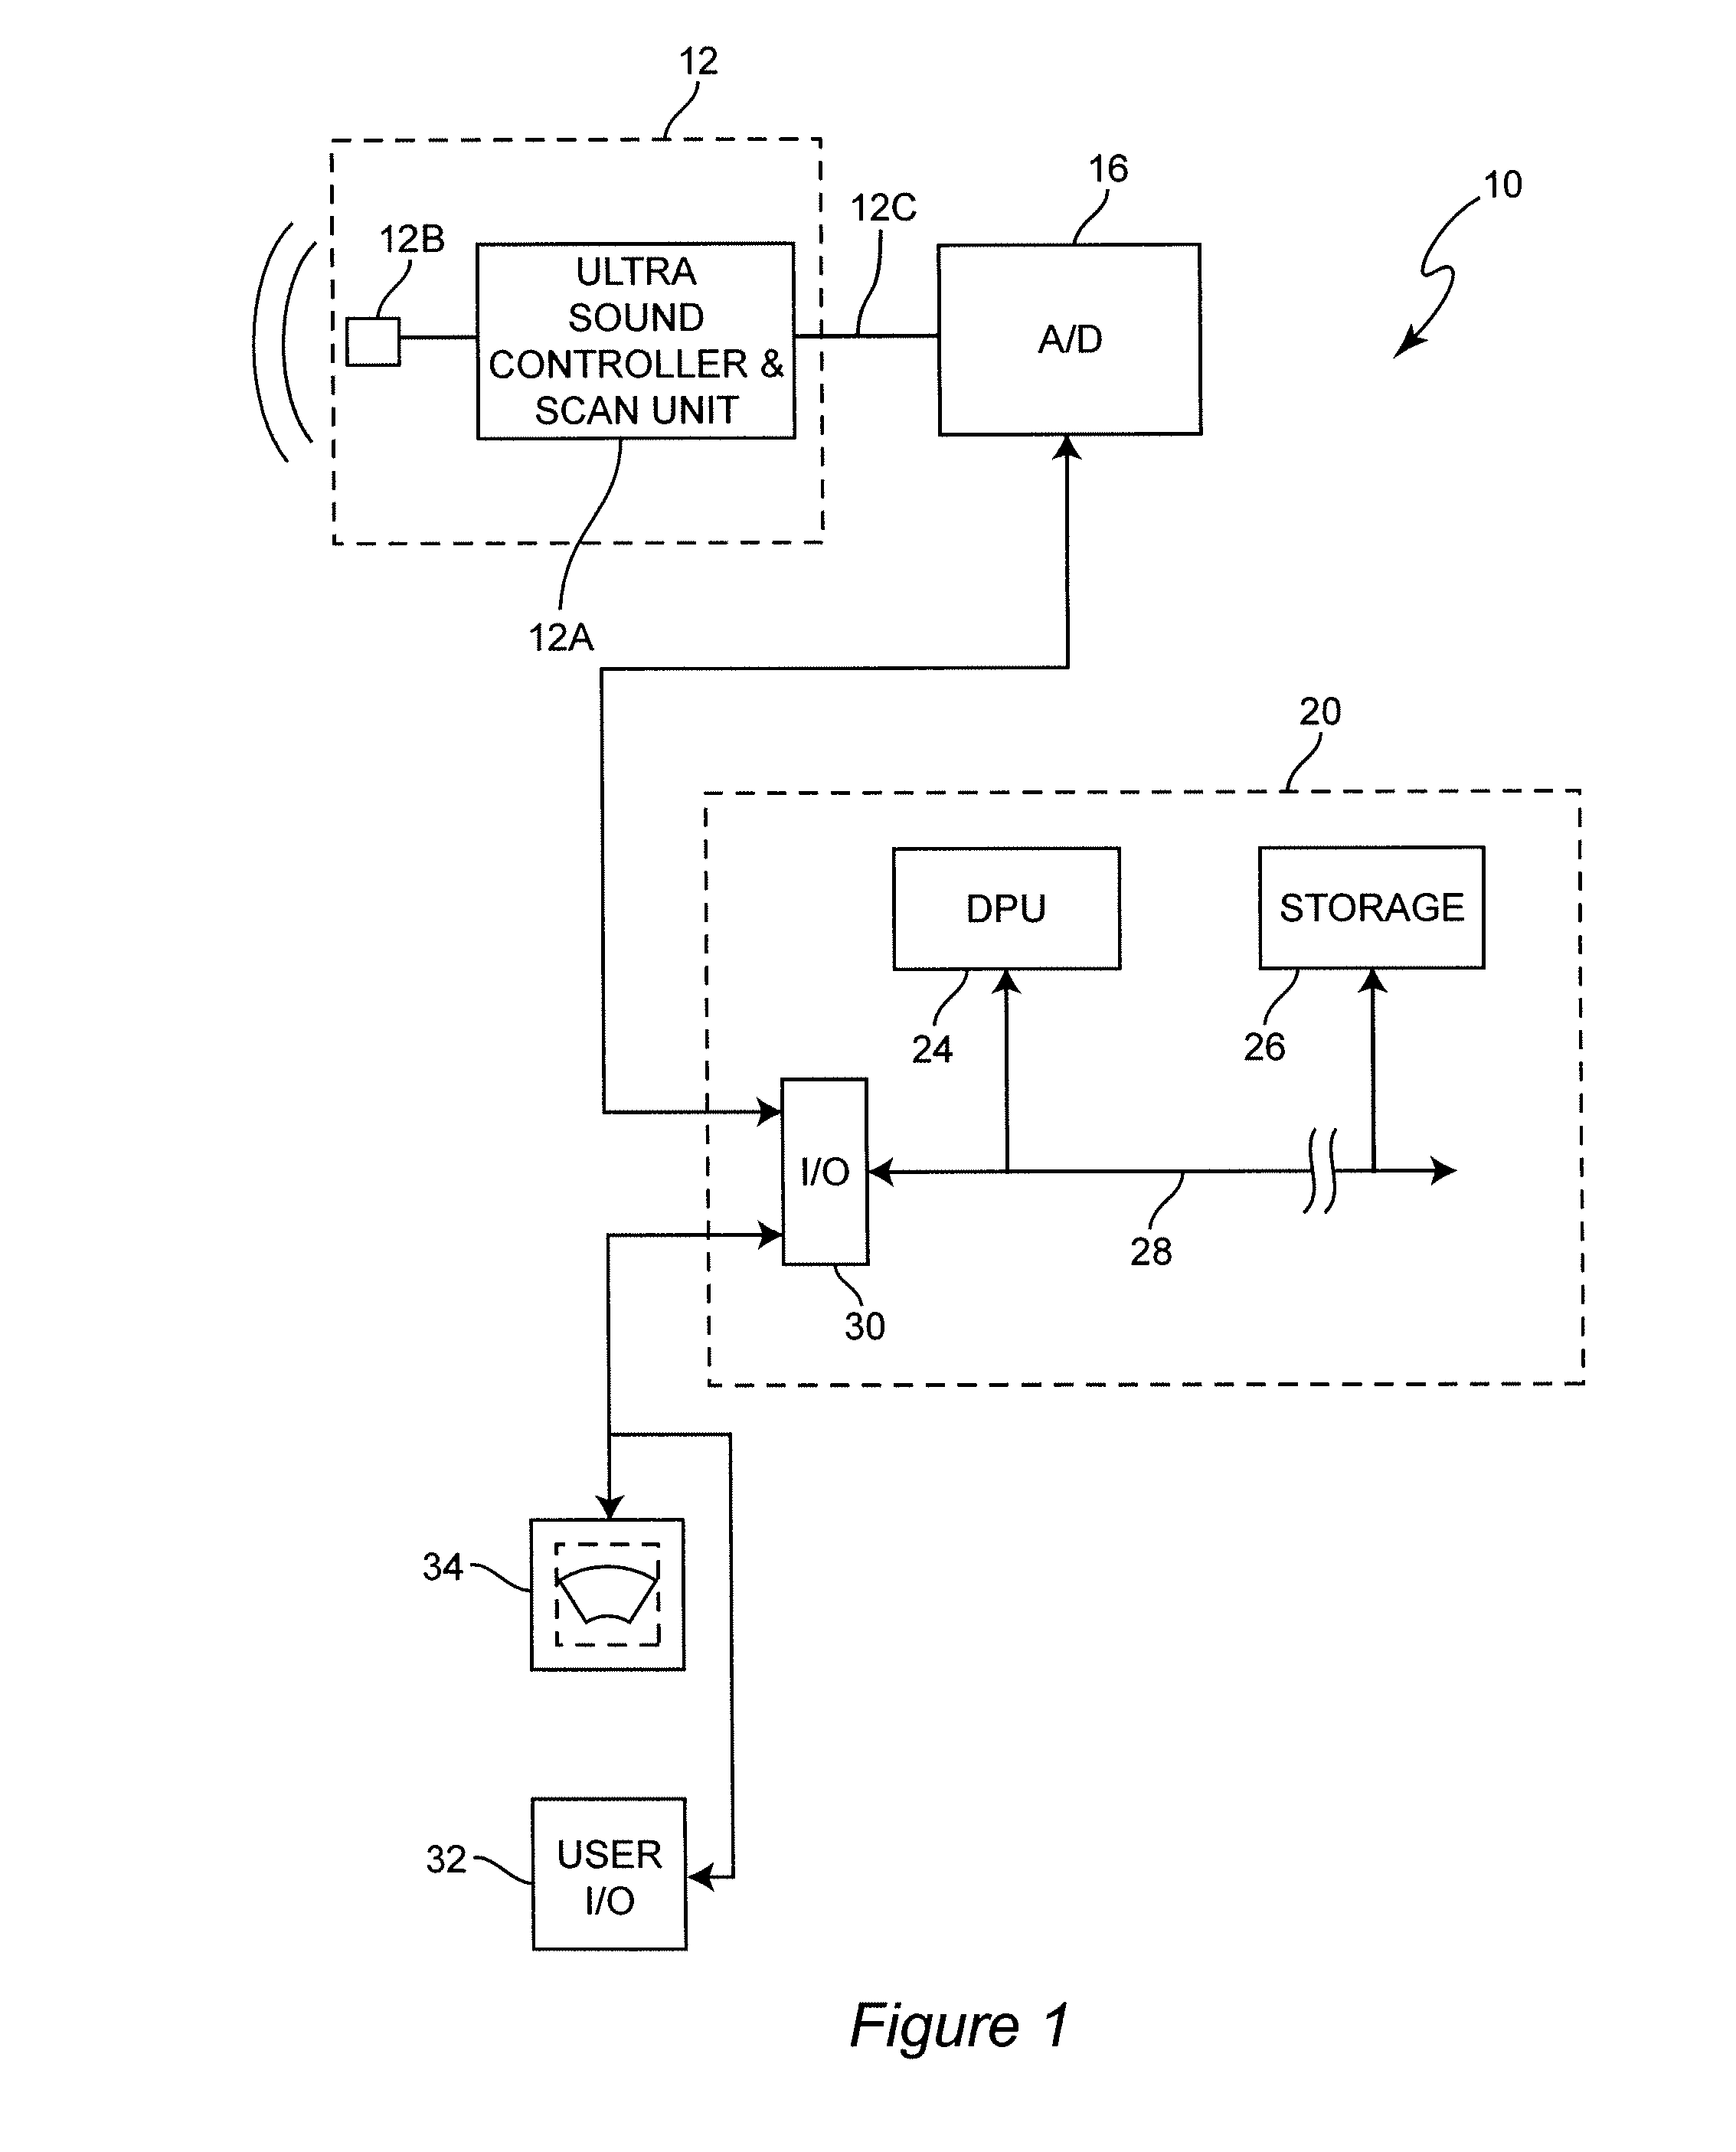 Method and system for detecting cancer regions in tissue images